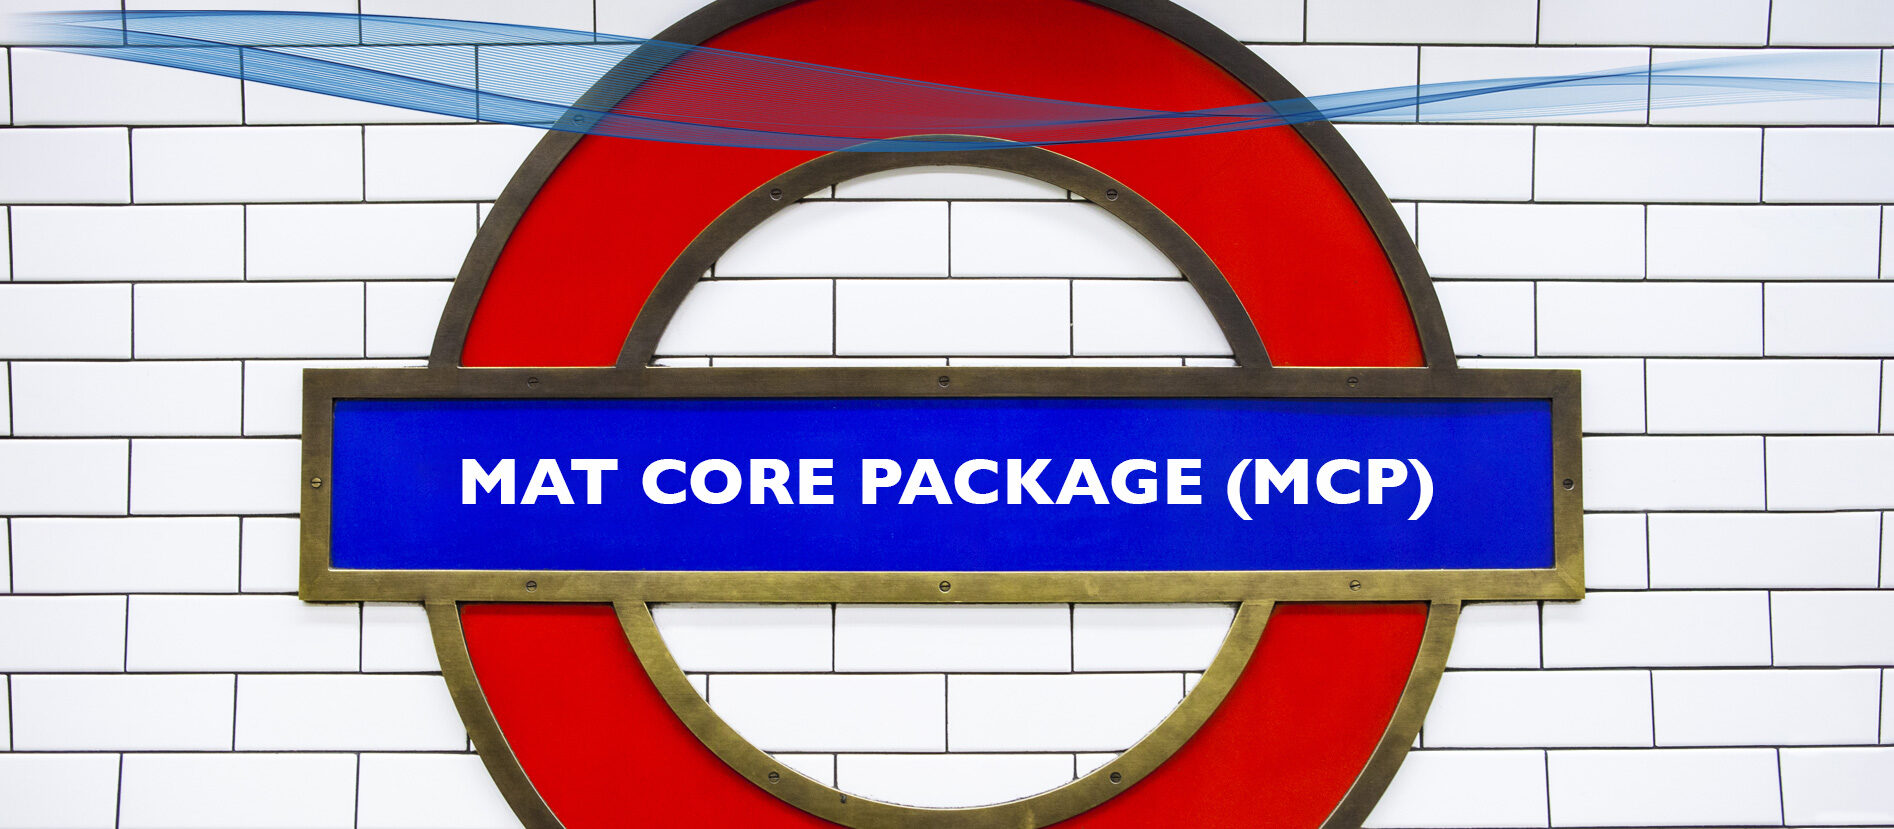 MAT CORE PACKAGE (MCP)